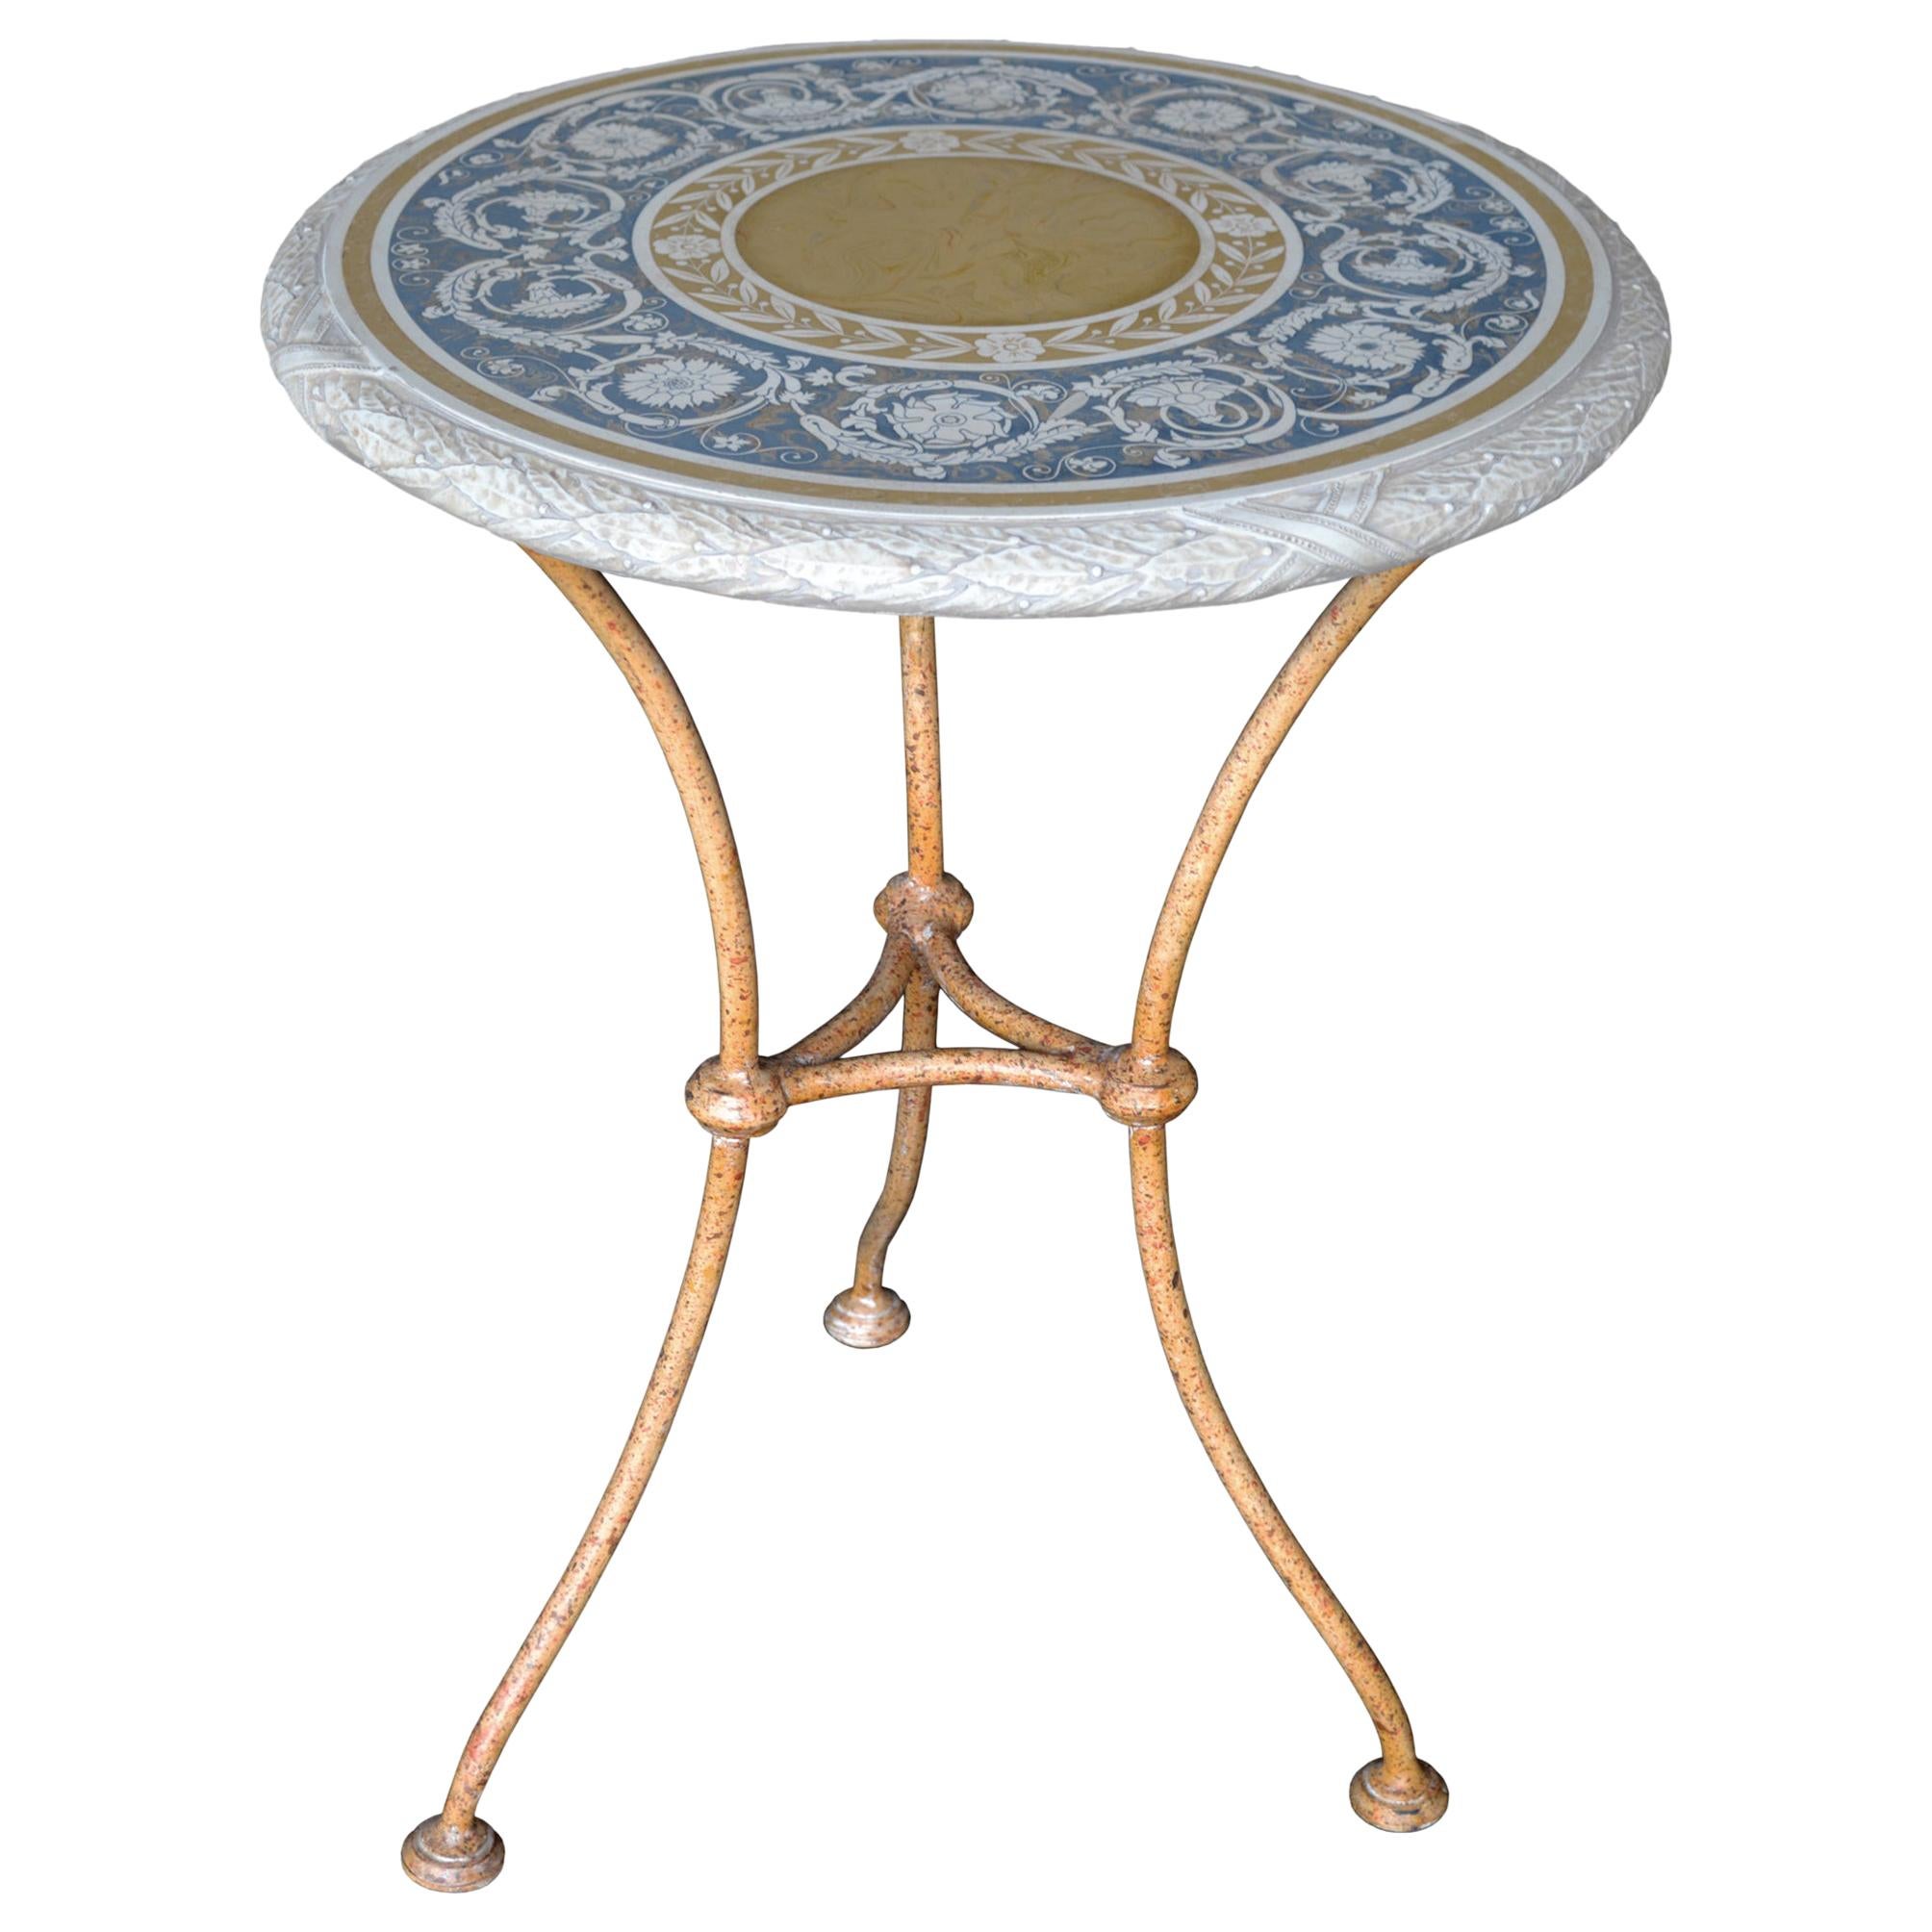 Side table scagliola inlaid top iron base handmade in Italy by Cupioli available